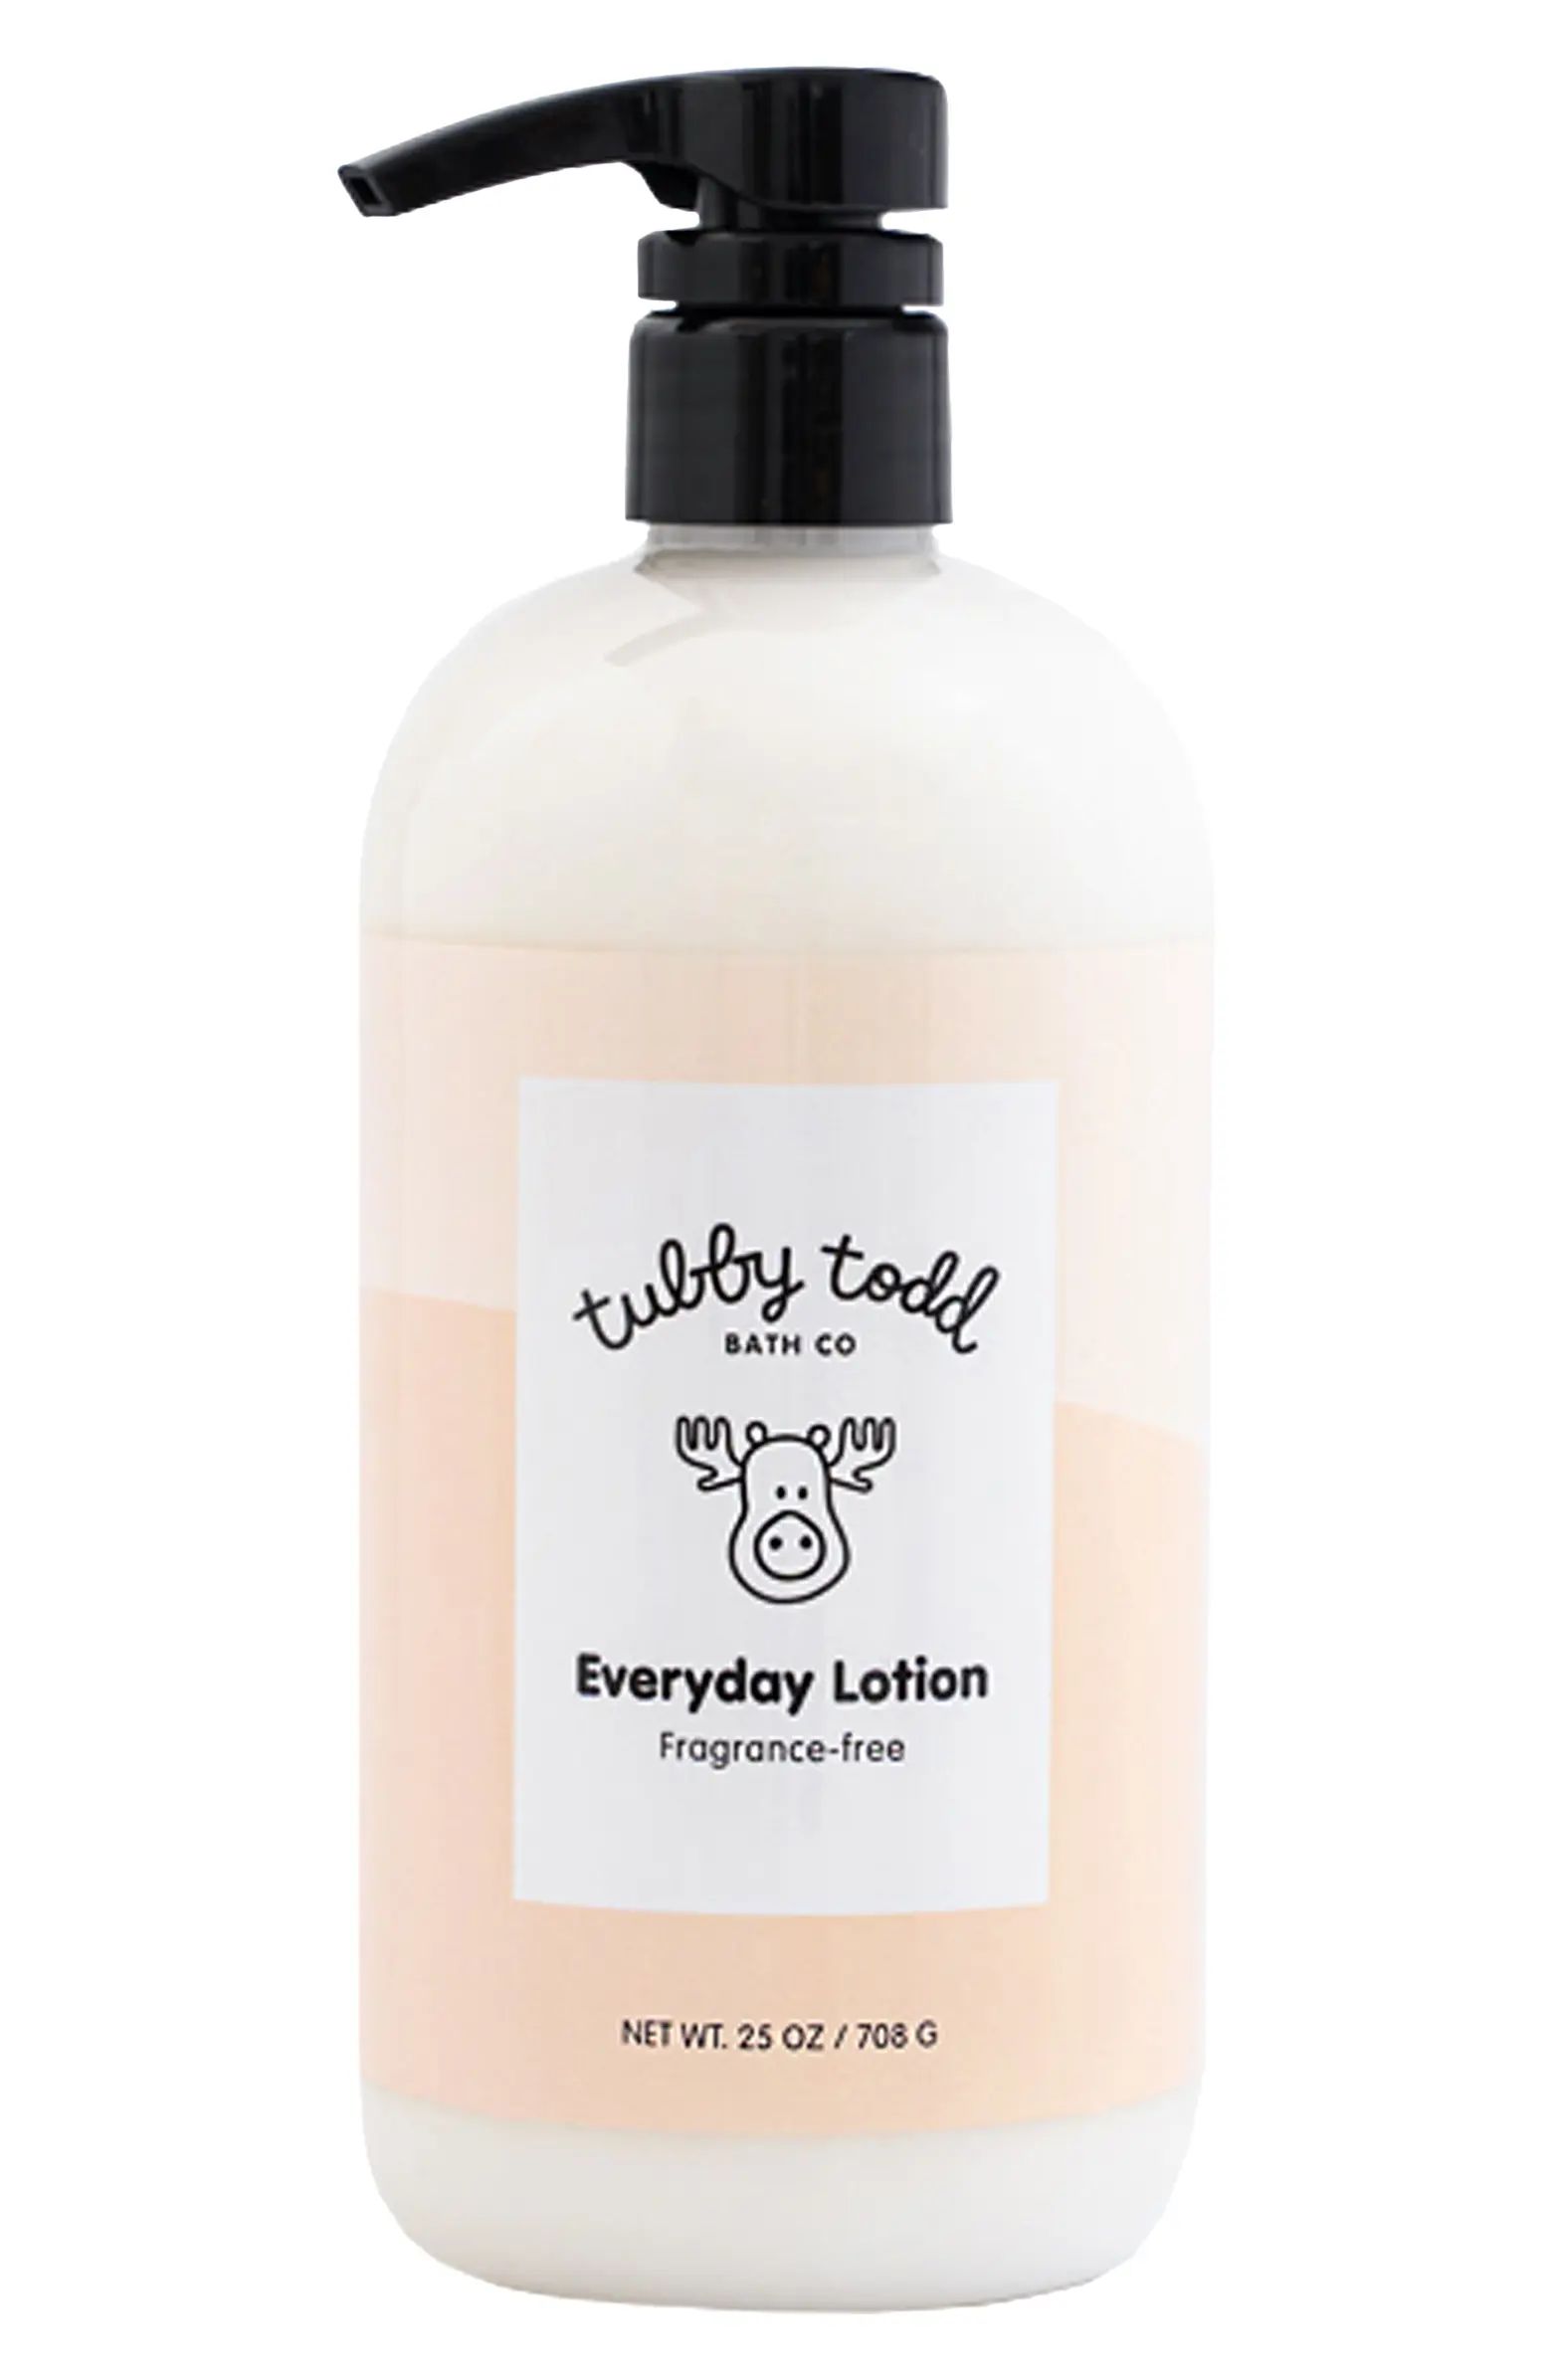 Tubby Todd Bath Co. Everyday Lotion | Nordstrom | Nordstrom